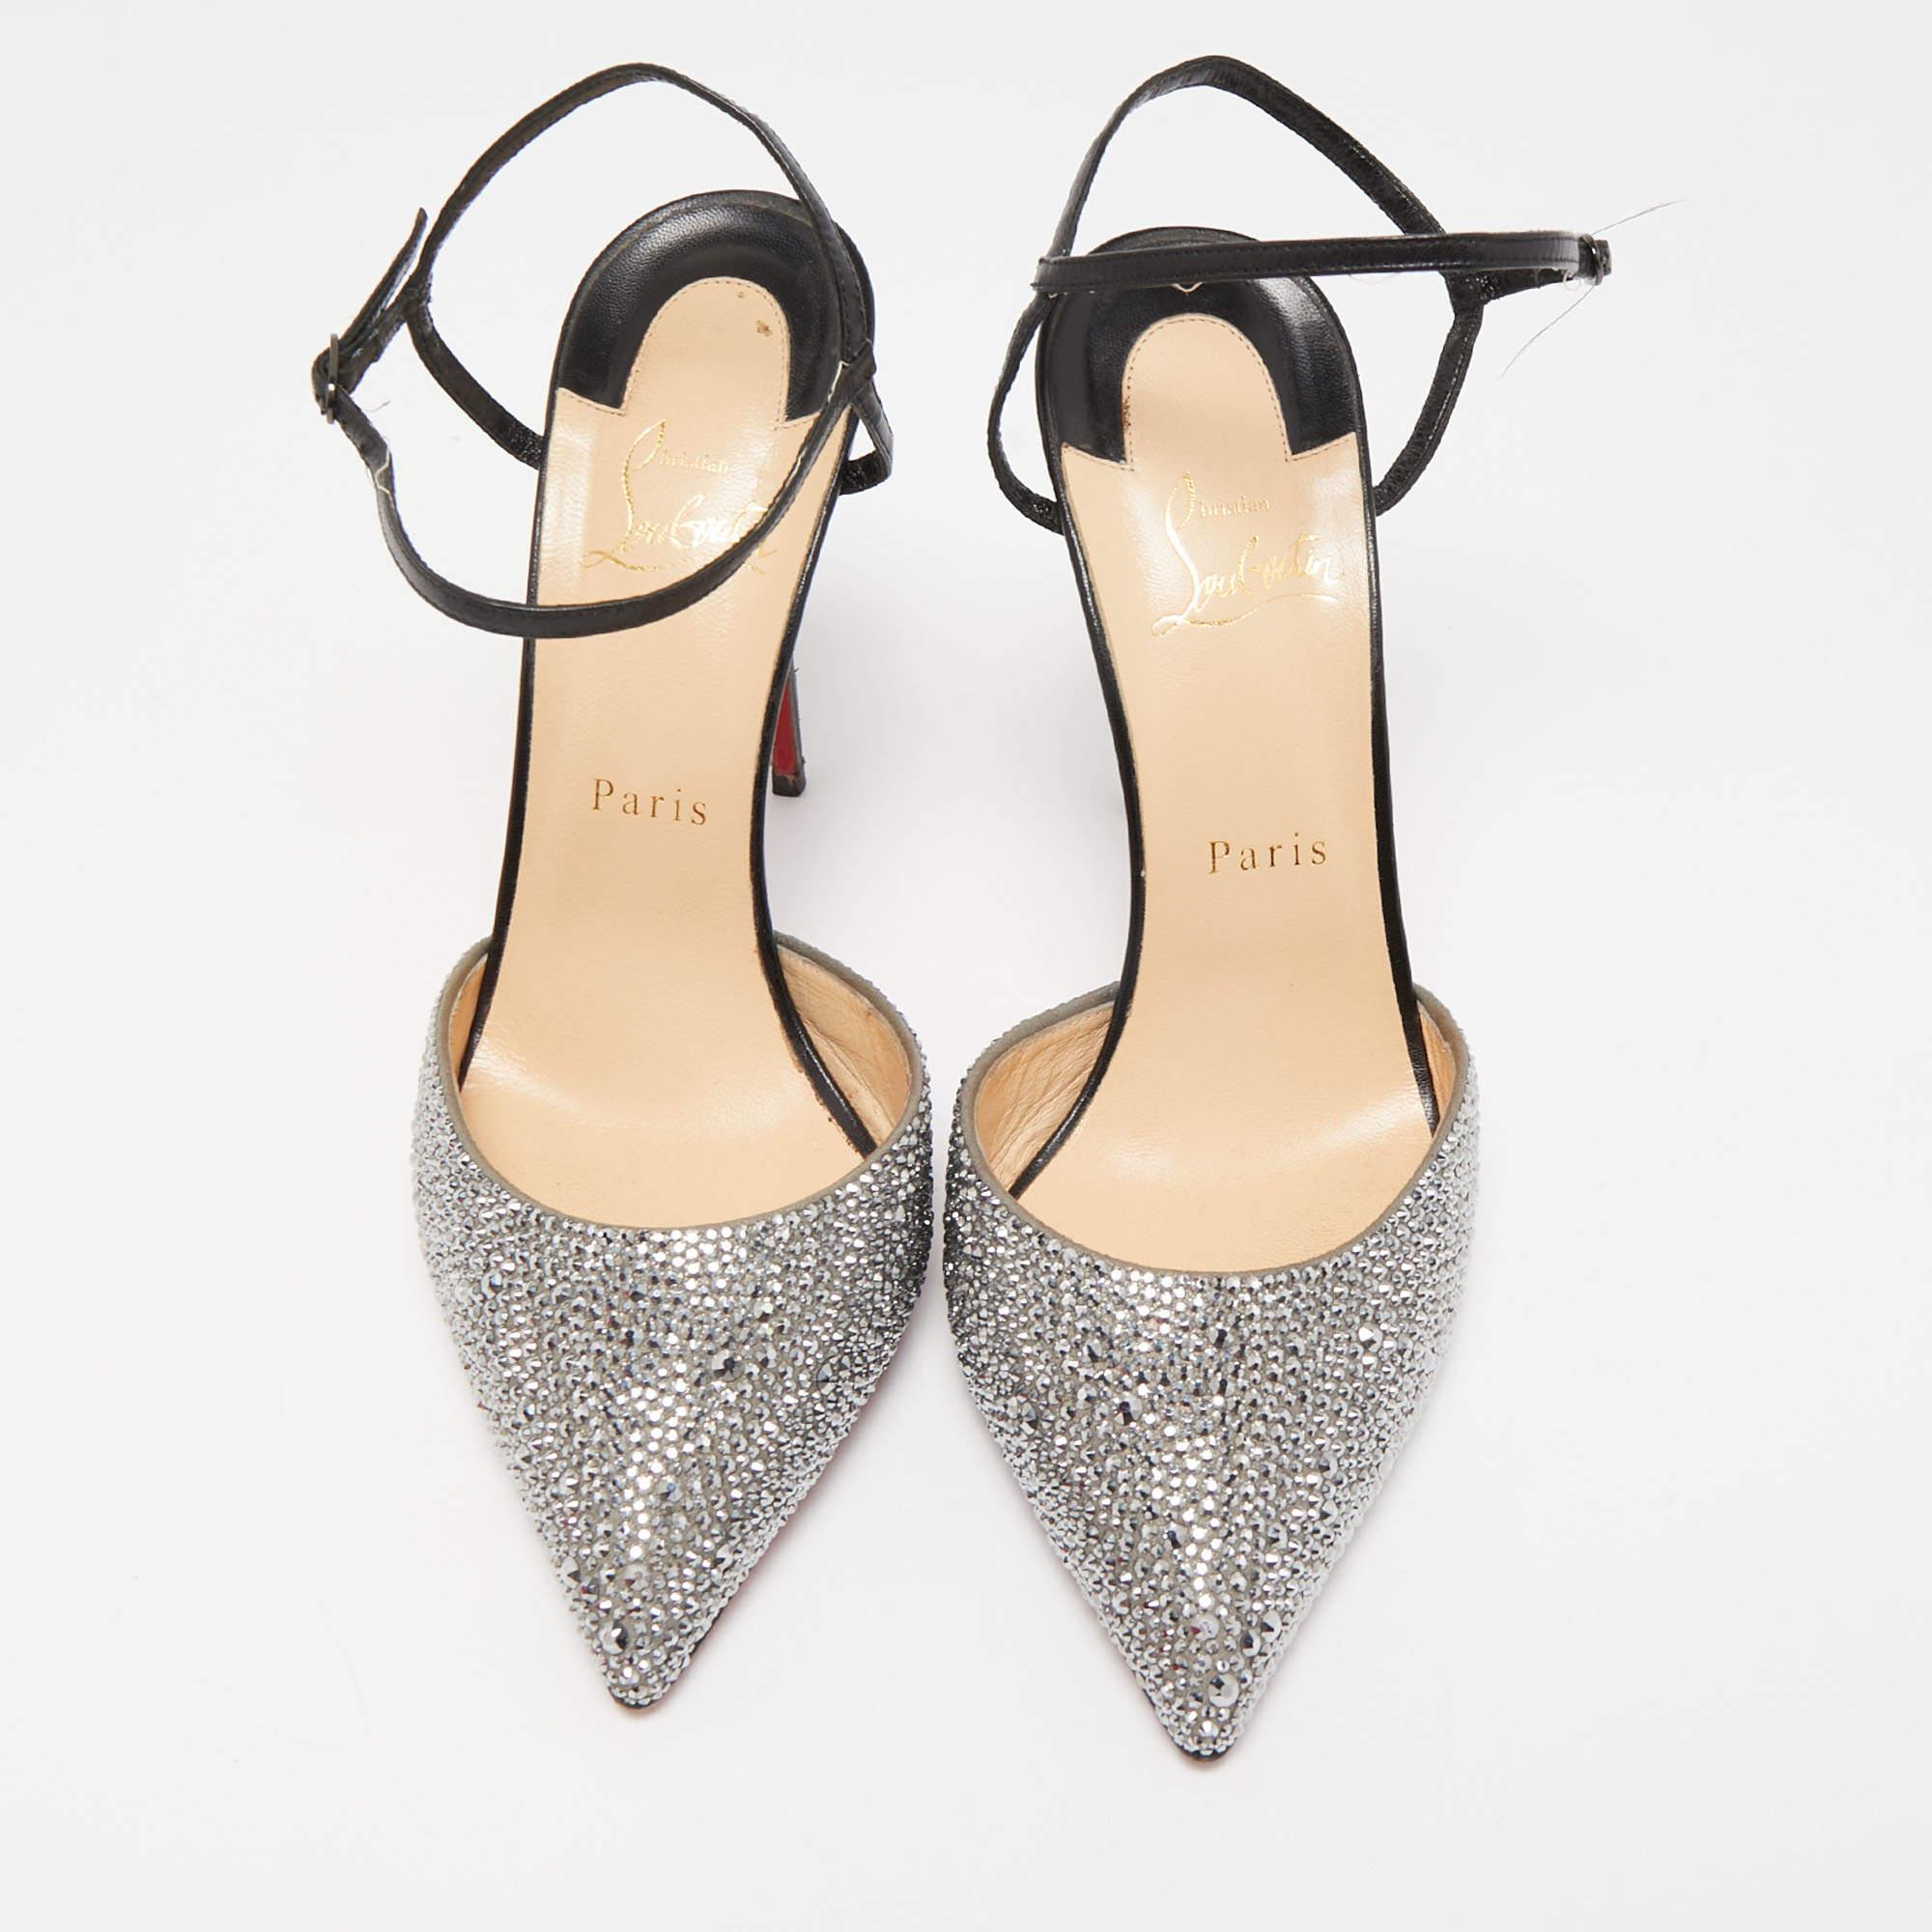 These super sleek Christian Louboutin Rivierina Strass pumps are meant to last you season after season. They have a fabulous fit and high-quality finish.

Includes
Original Dustbag